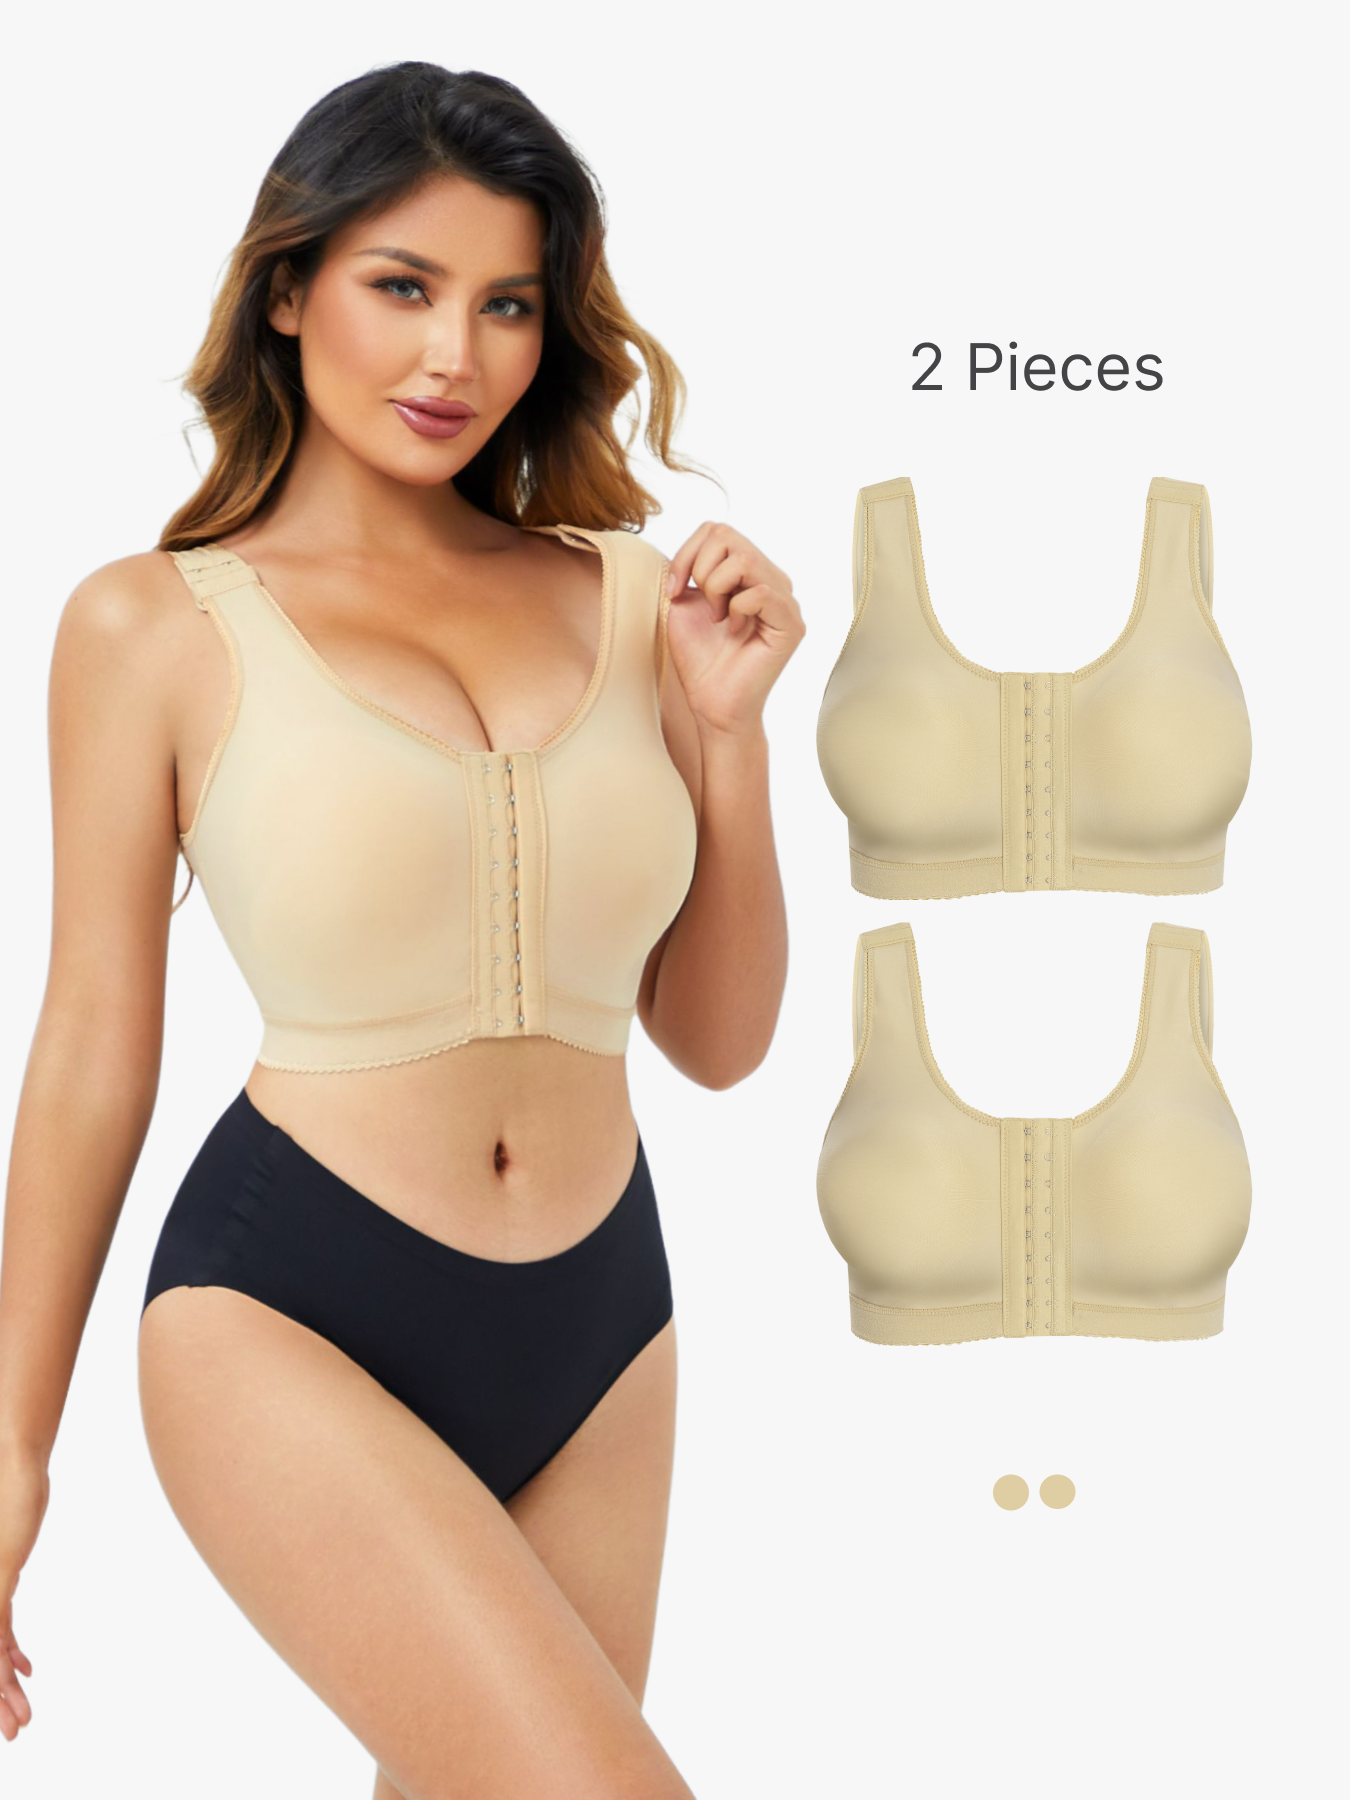 BRABIC 2-Piece Set  Adjustable Post Surgery Front Closure Bras for Women TO010